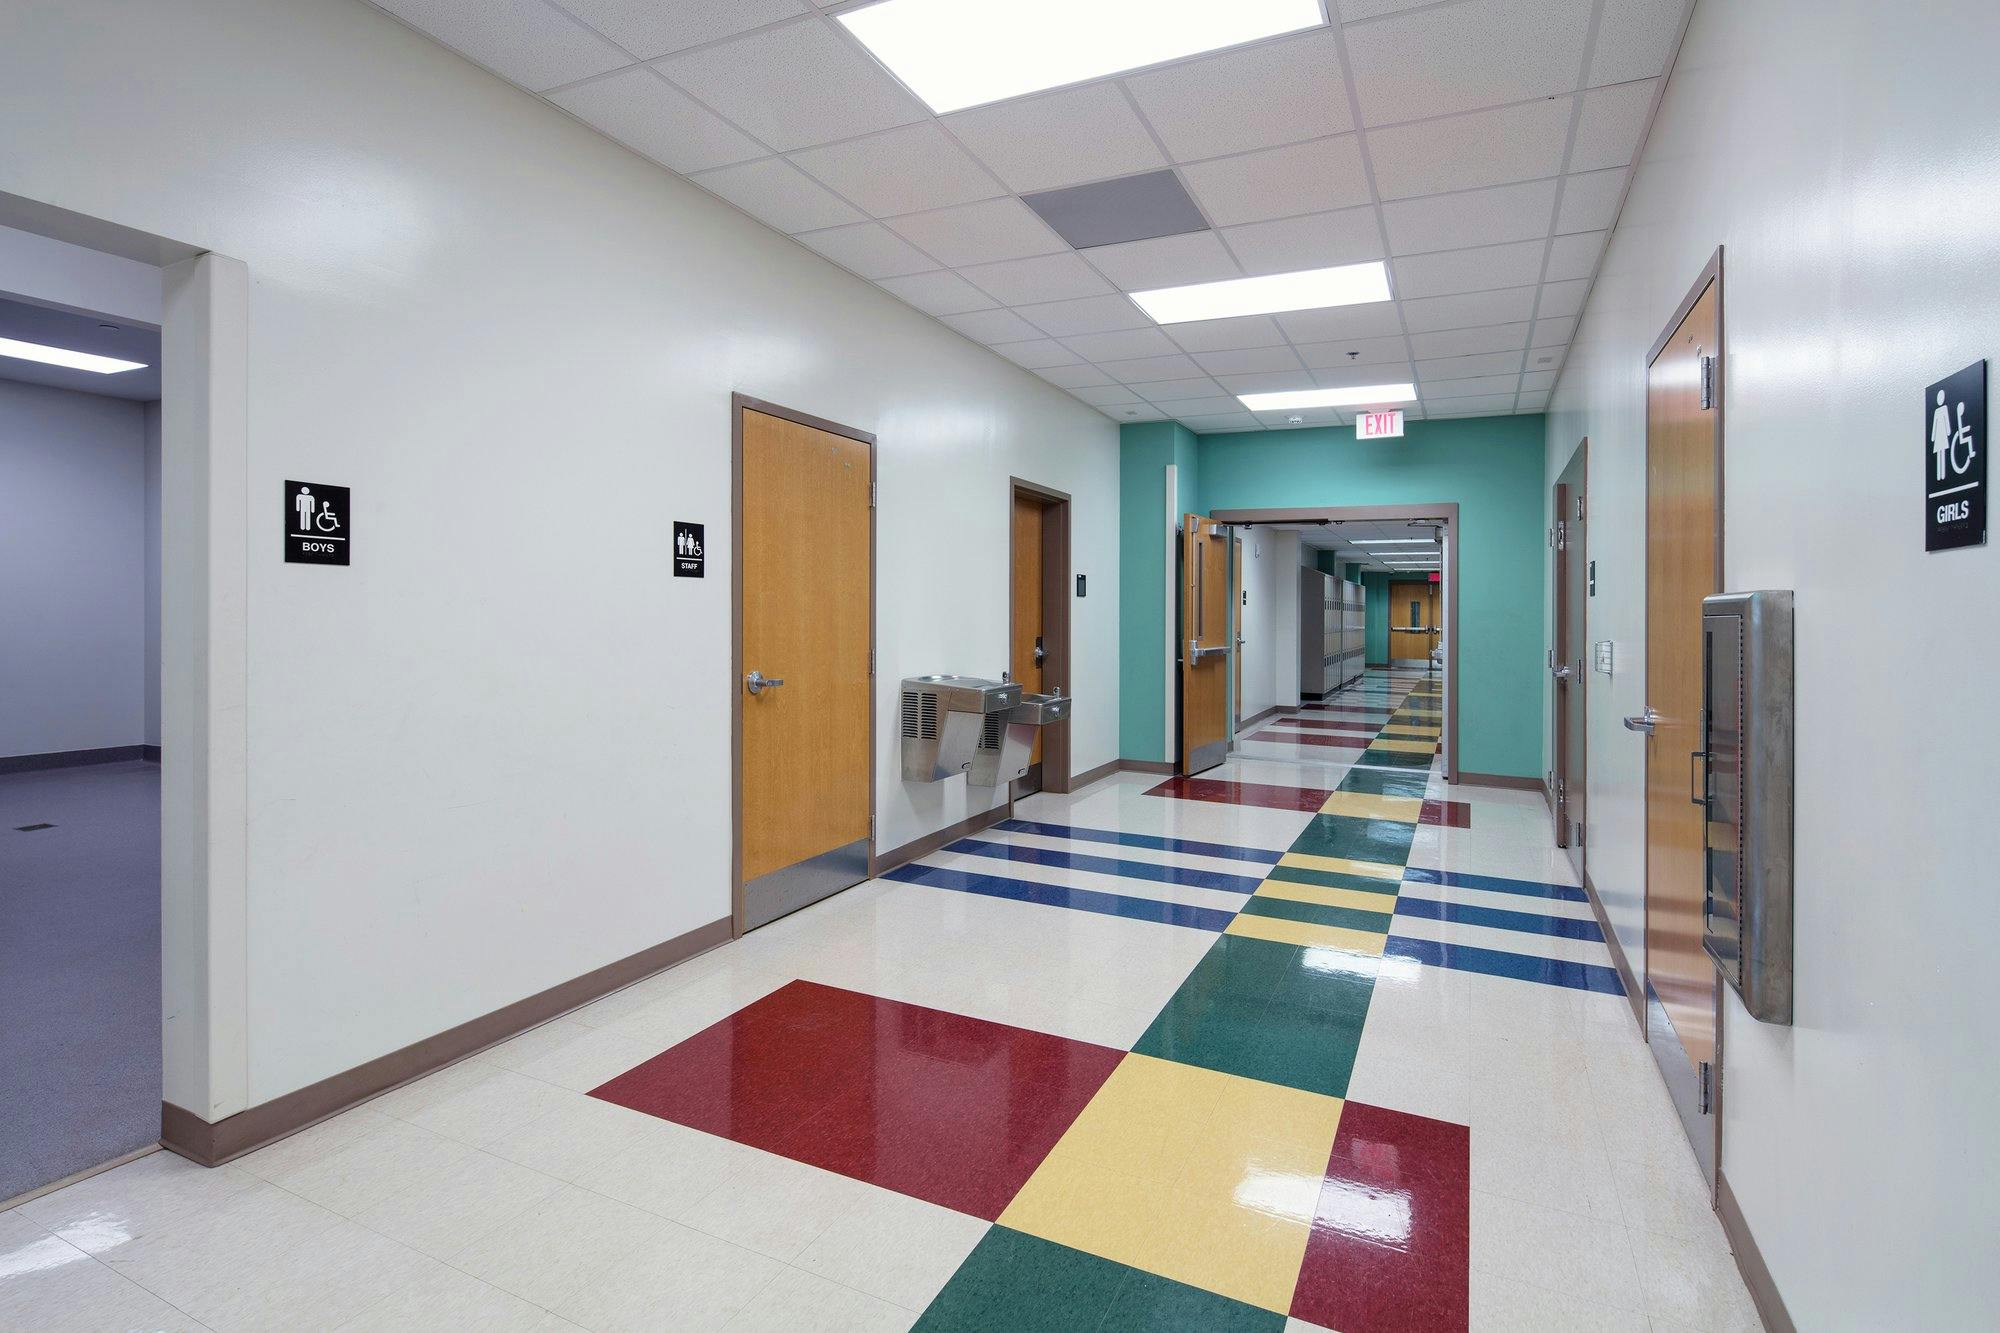 Multi-color patterned tile floors line the hallway of Long Middle School.